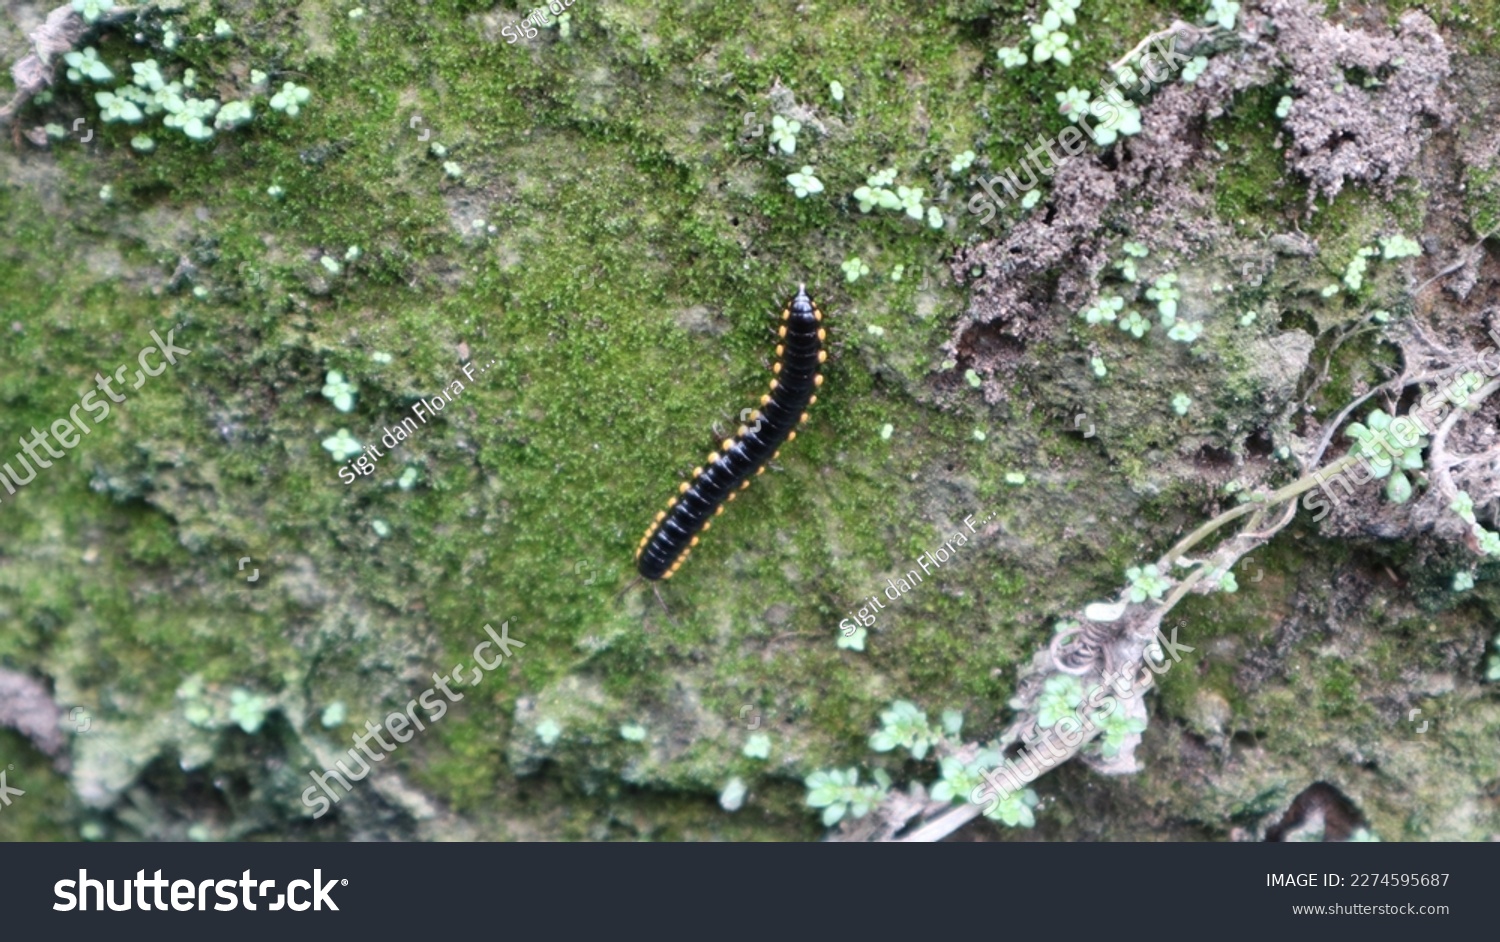 Millipedes, luing, luwing, or keluwing are arthropods that have two pairs of legs per segment. Millipedes are an order of invertebrate members belonging to the phylum Arthropoda, class Myriapoda. #2274595687